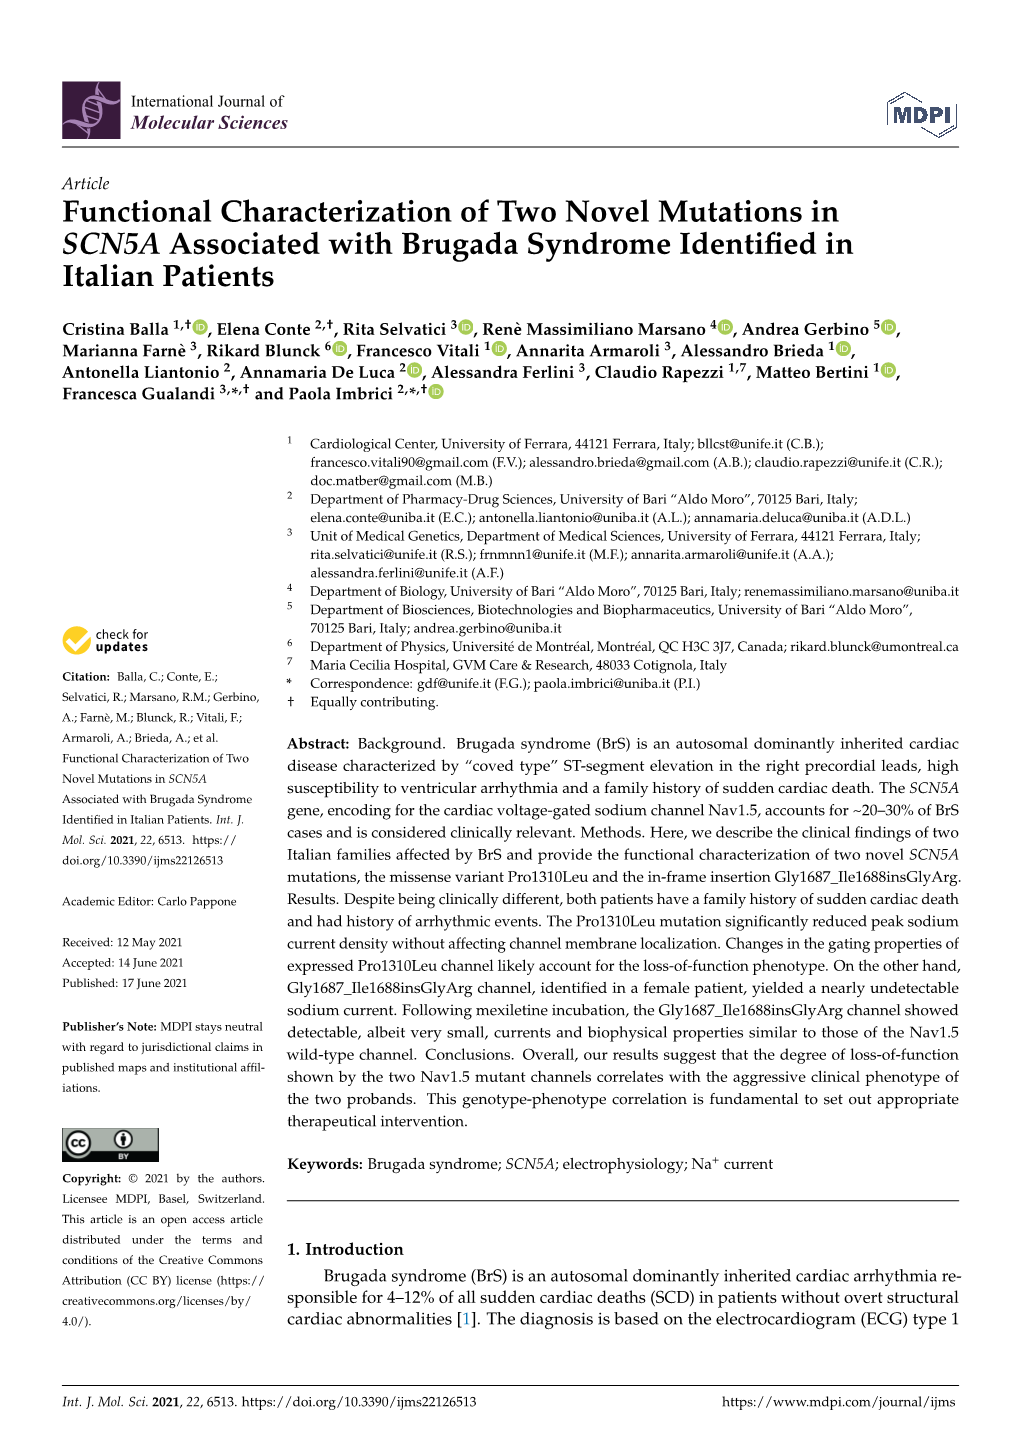 Functional Characterization of Two Novel Mutations in SCN5A Associated with Brugada Syndrome Identiﬁed in Italian Patients